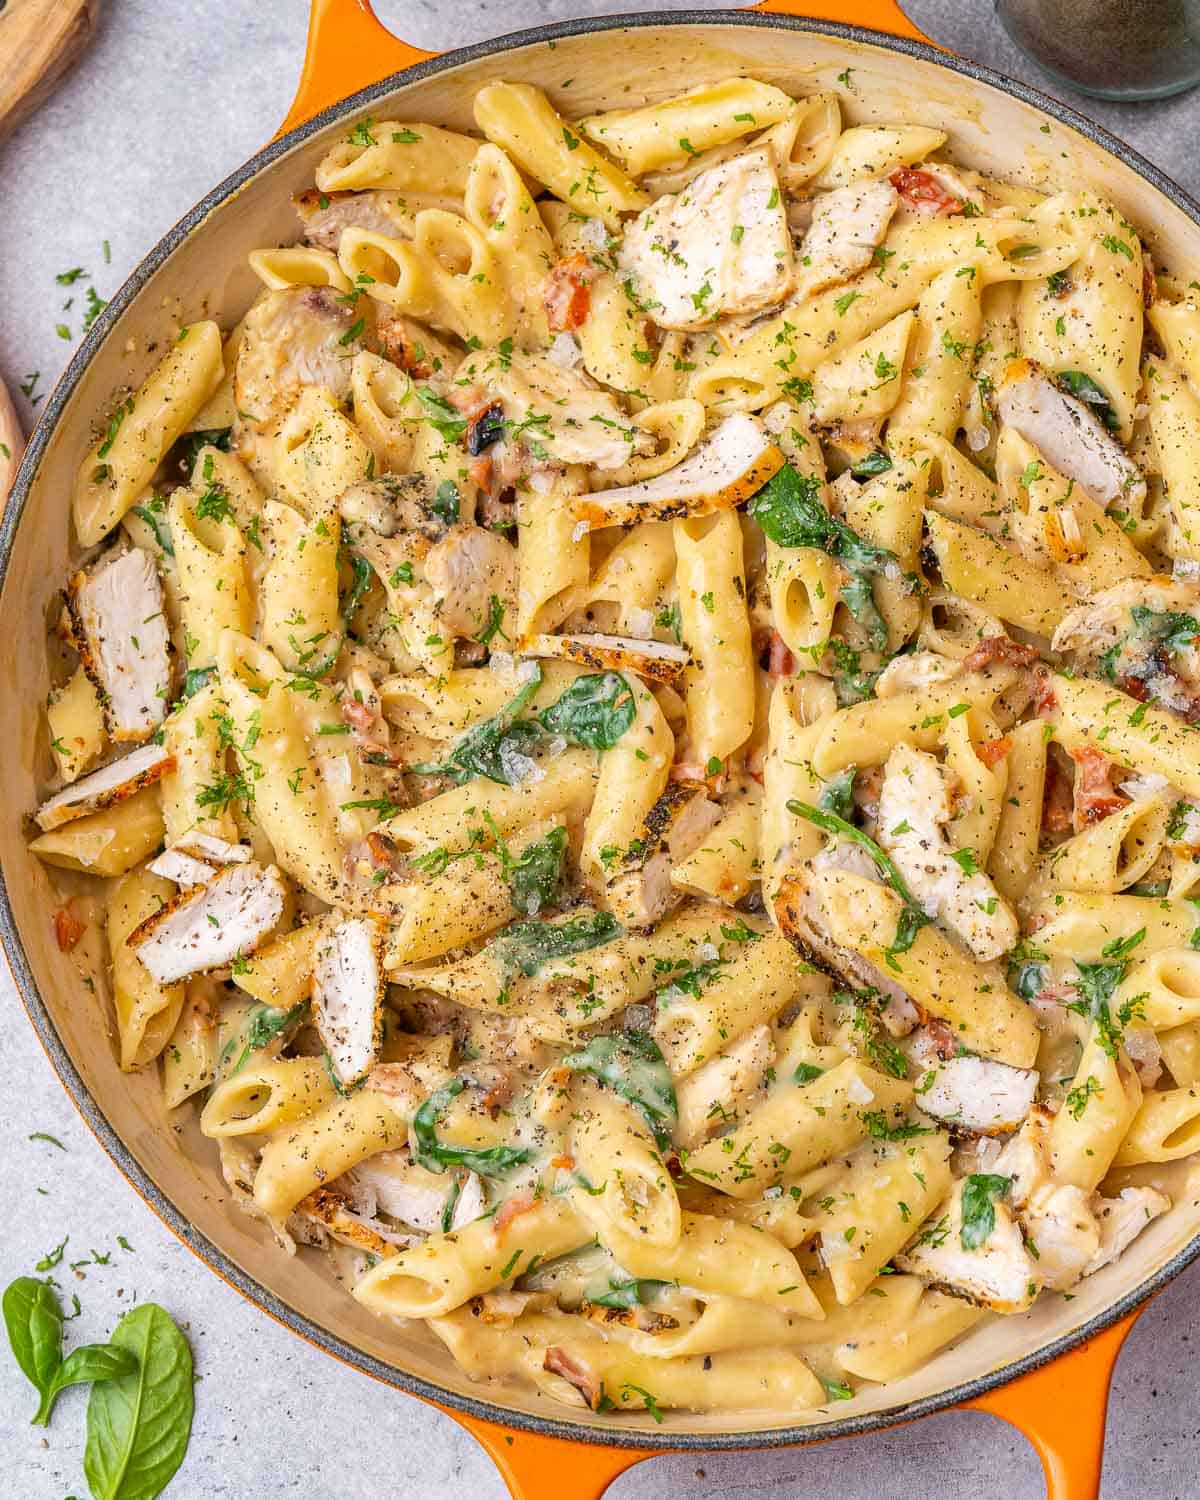 Rave Essentials: How to Make Spinach and Grilled Chicken Pasta